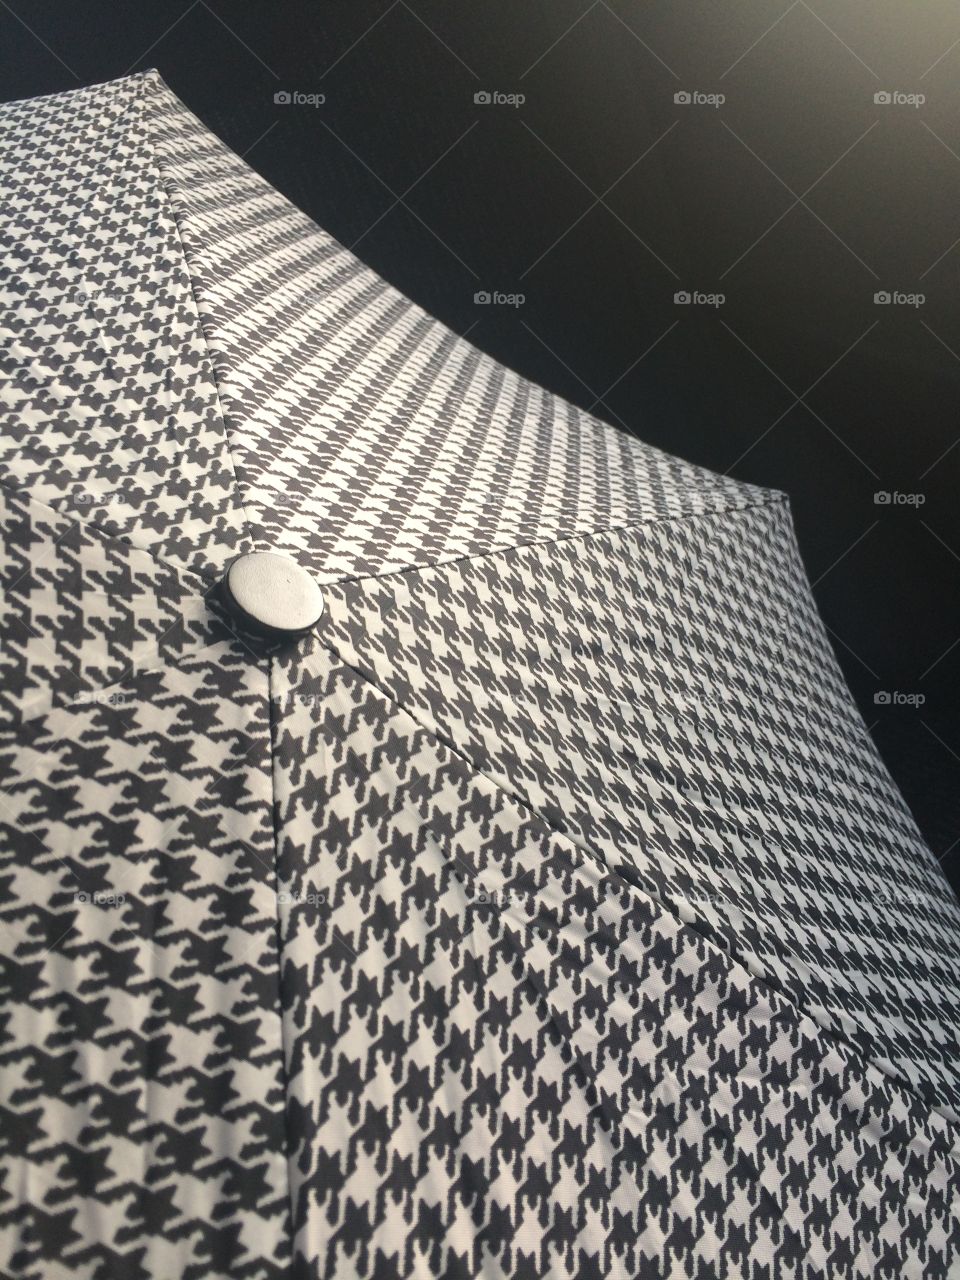 Dogtooth Umbrella. Captured this in the darkness of a taxi drive home one evening. Love how bold it looks, almost like outer space.